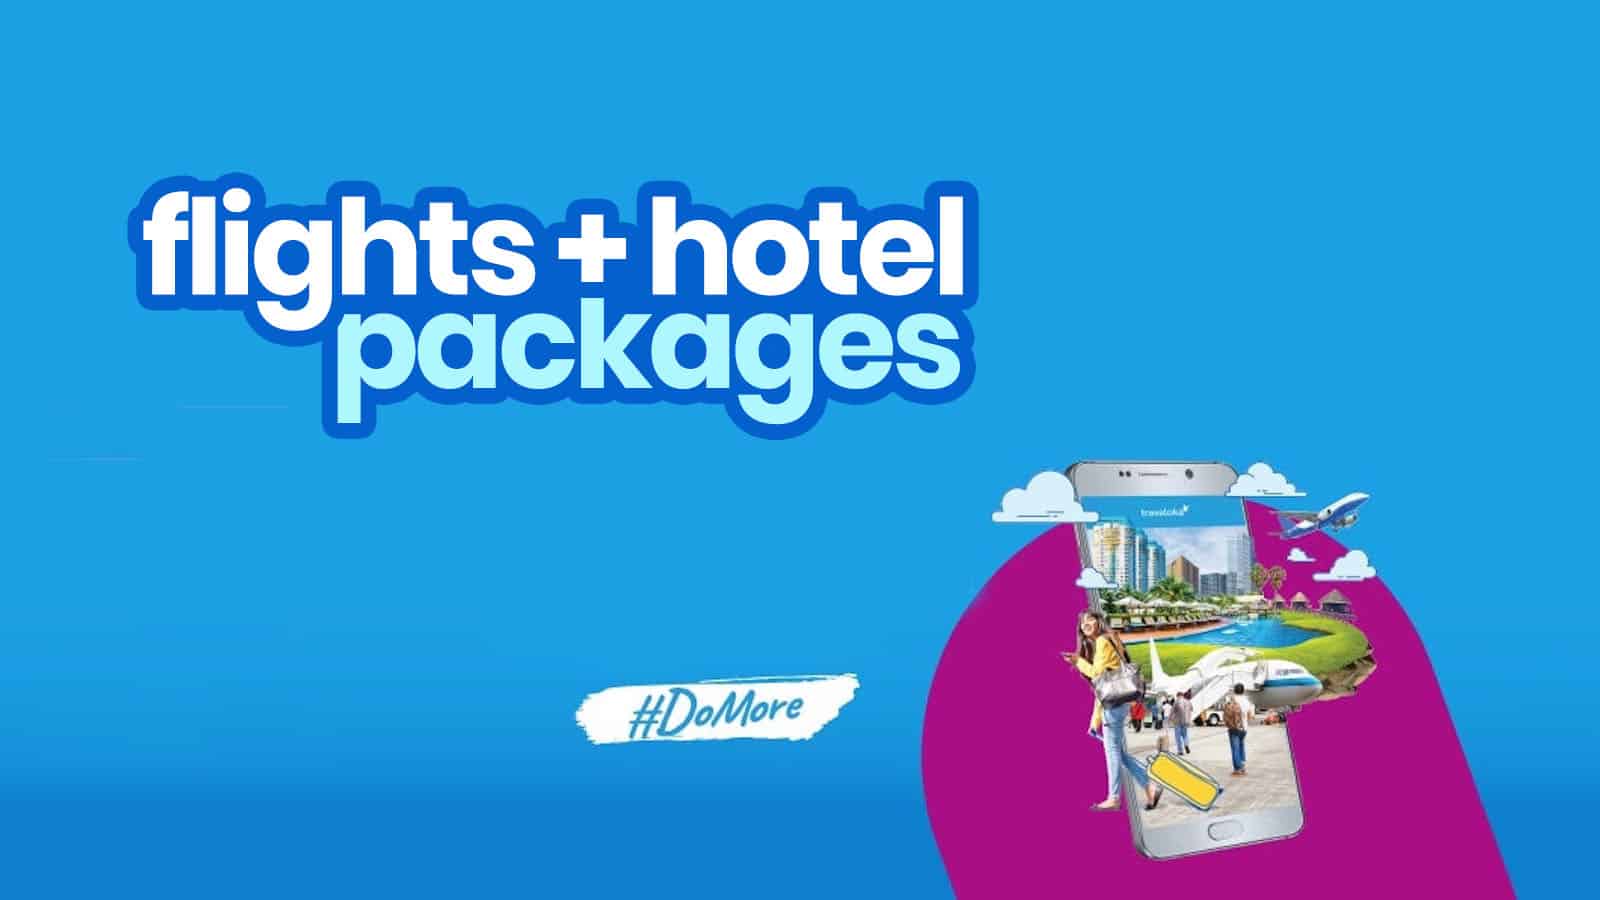 How to Book FLIGHTS + HOTEL PACKAGE with Traveloka